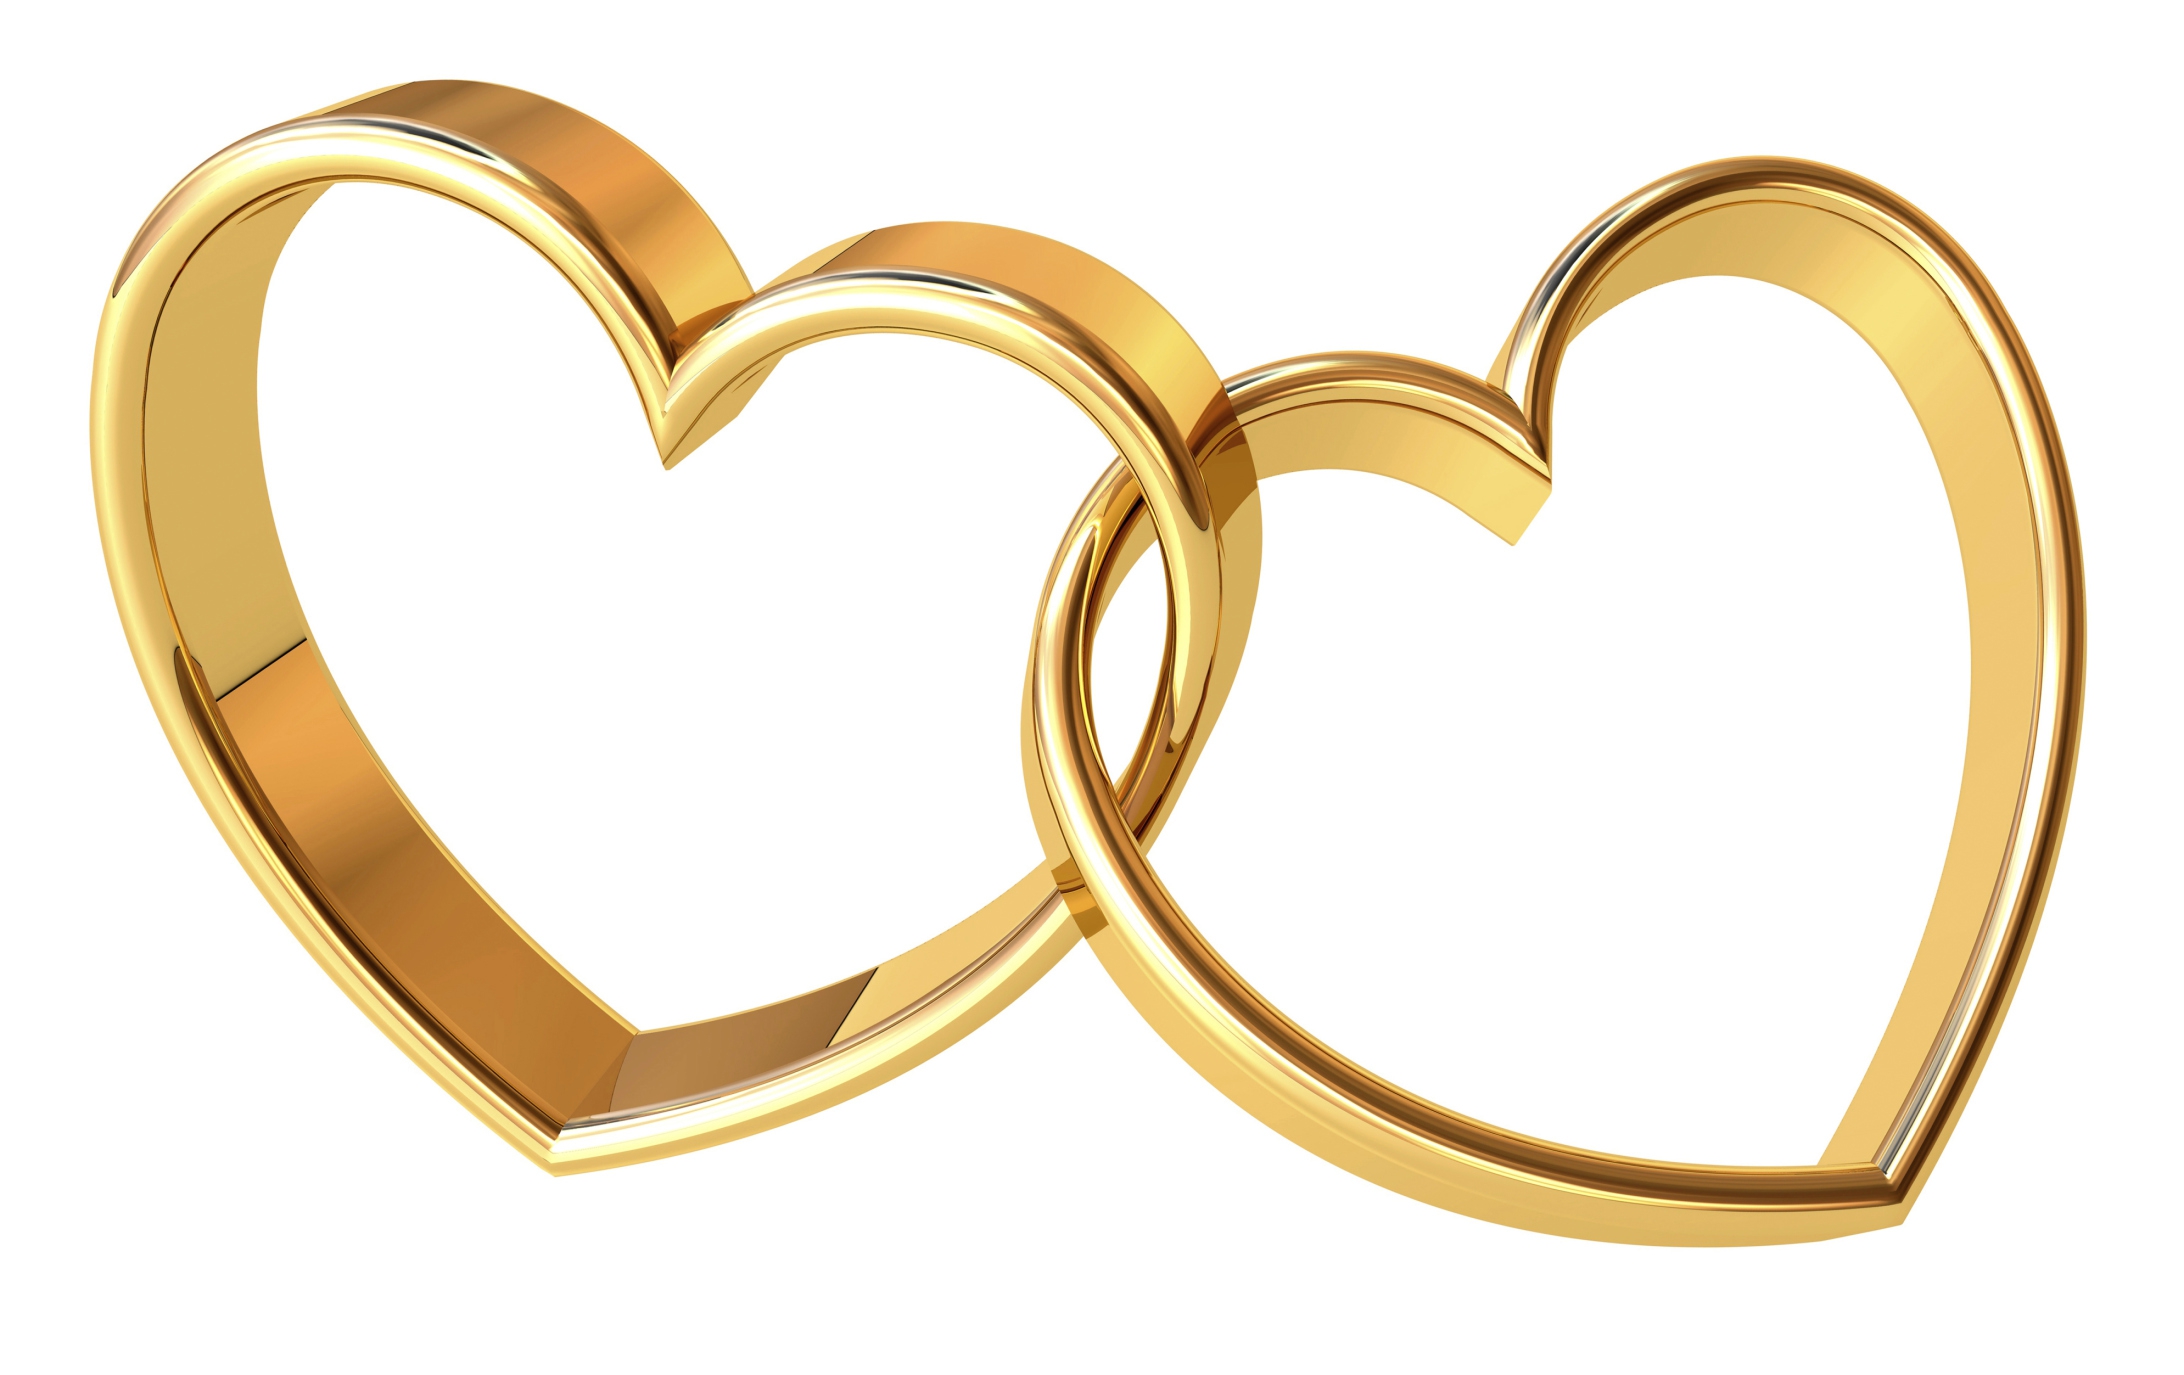 Clipart wedding rings